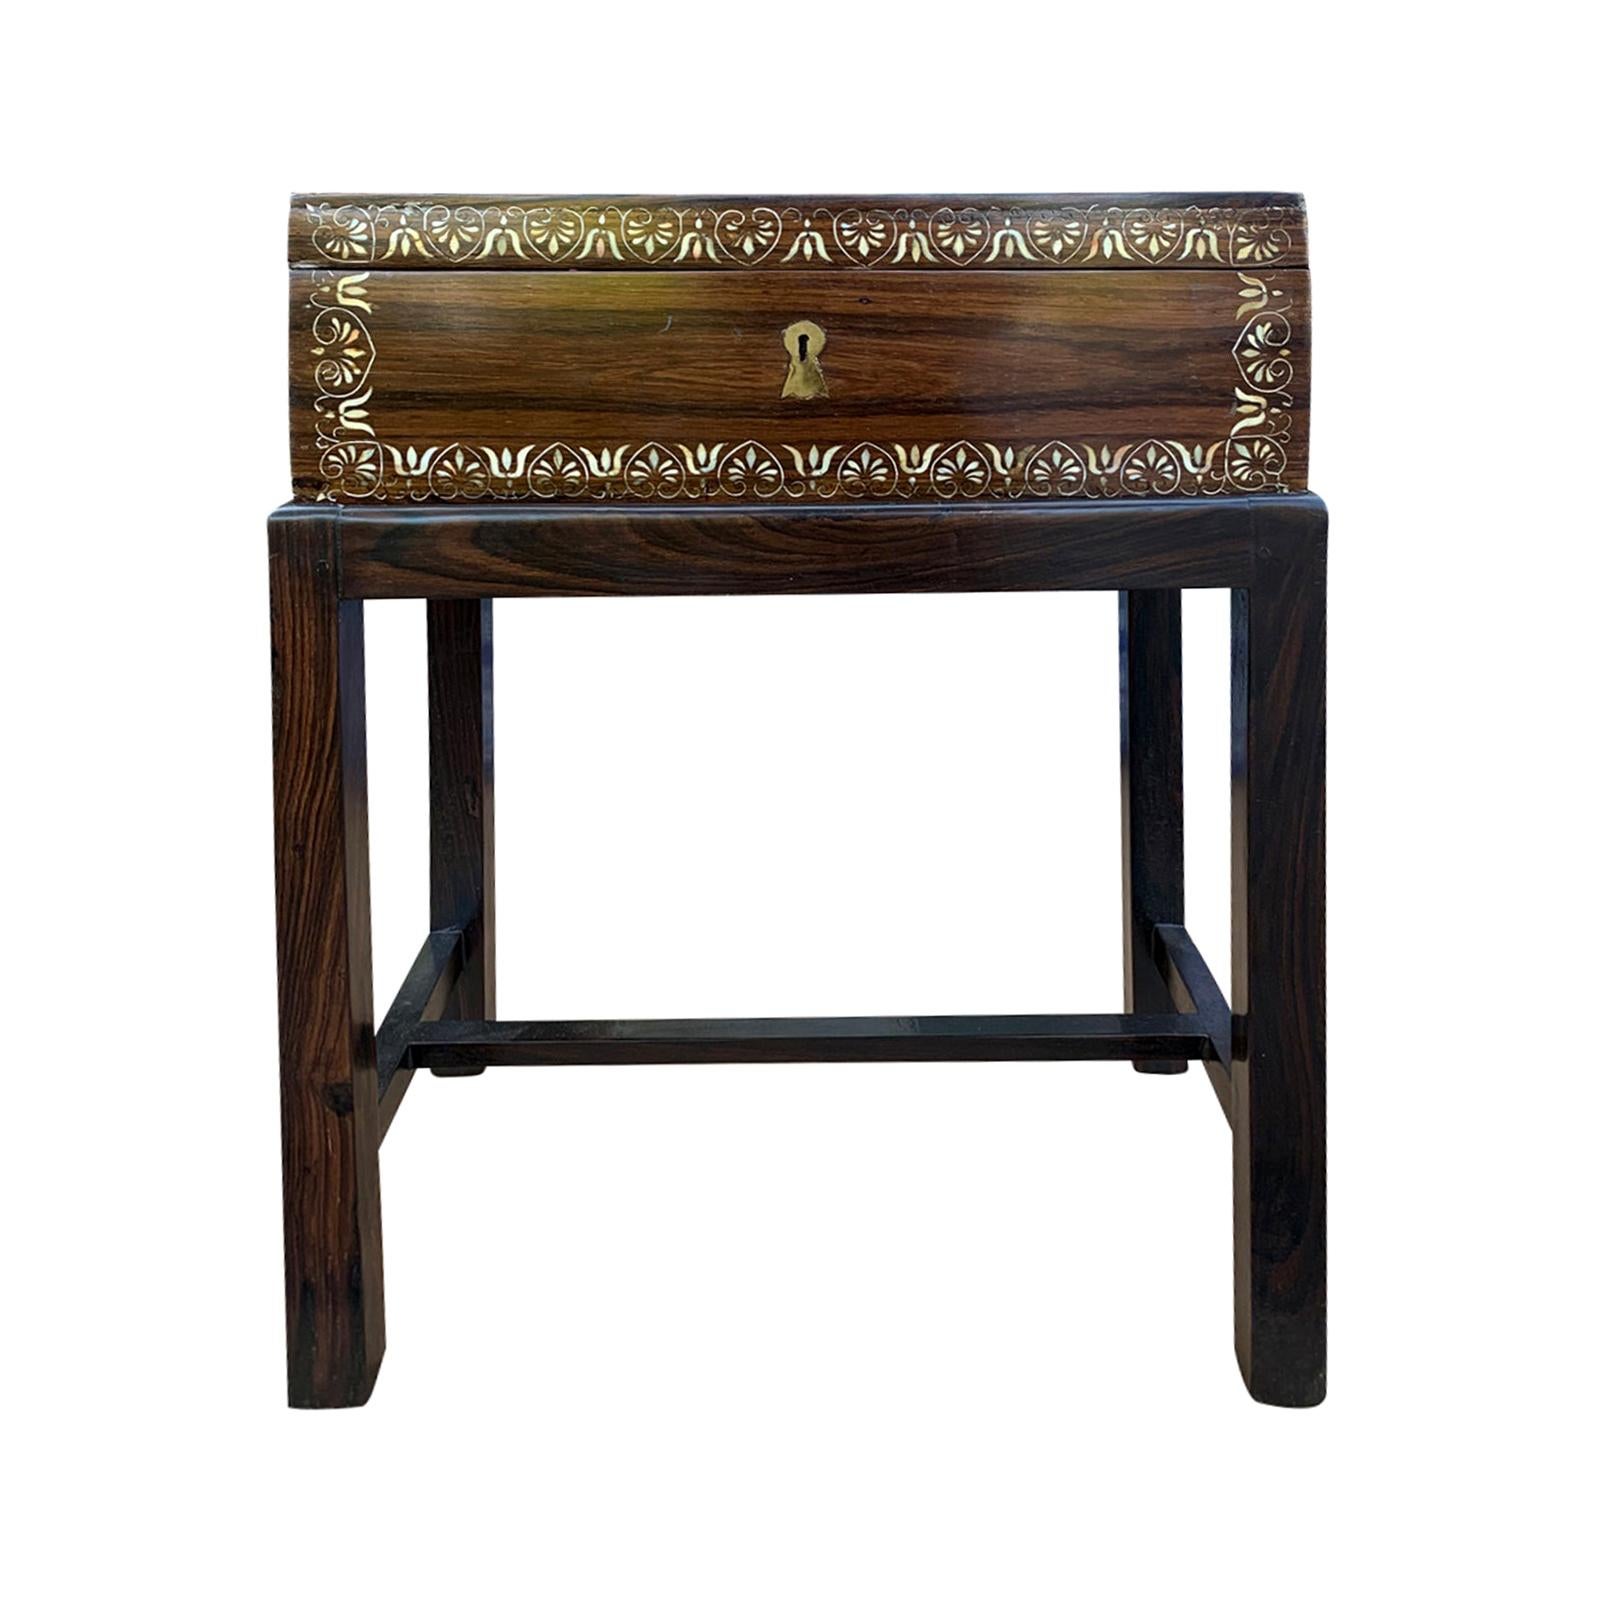 19th-20th Century Anglo-Indian Inlaid Box on Stand